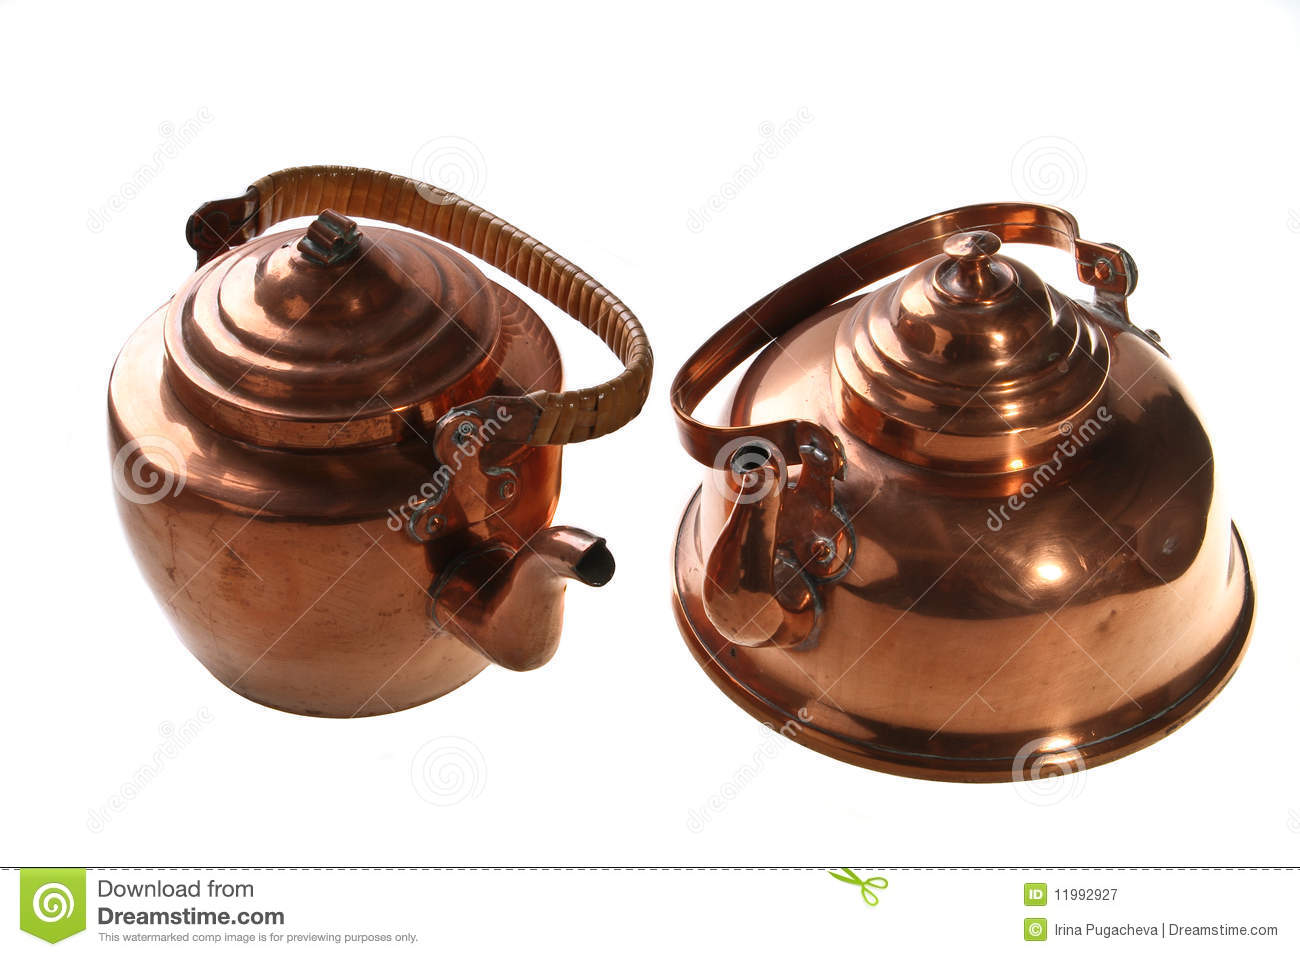 Copper Kettles Royalty Free Stock Photography   Image  11992927